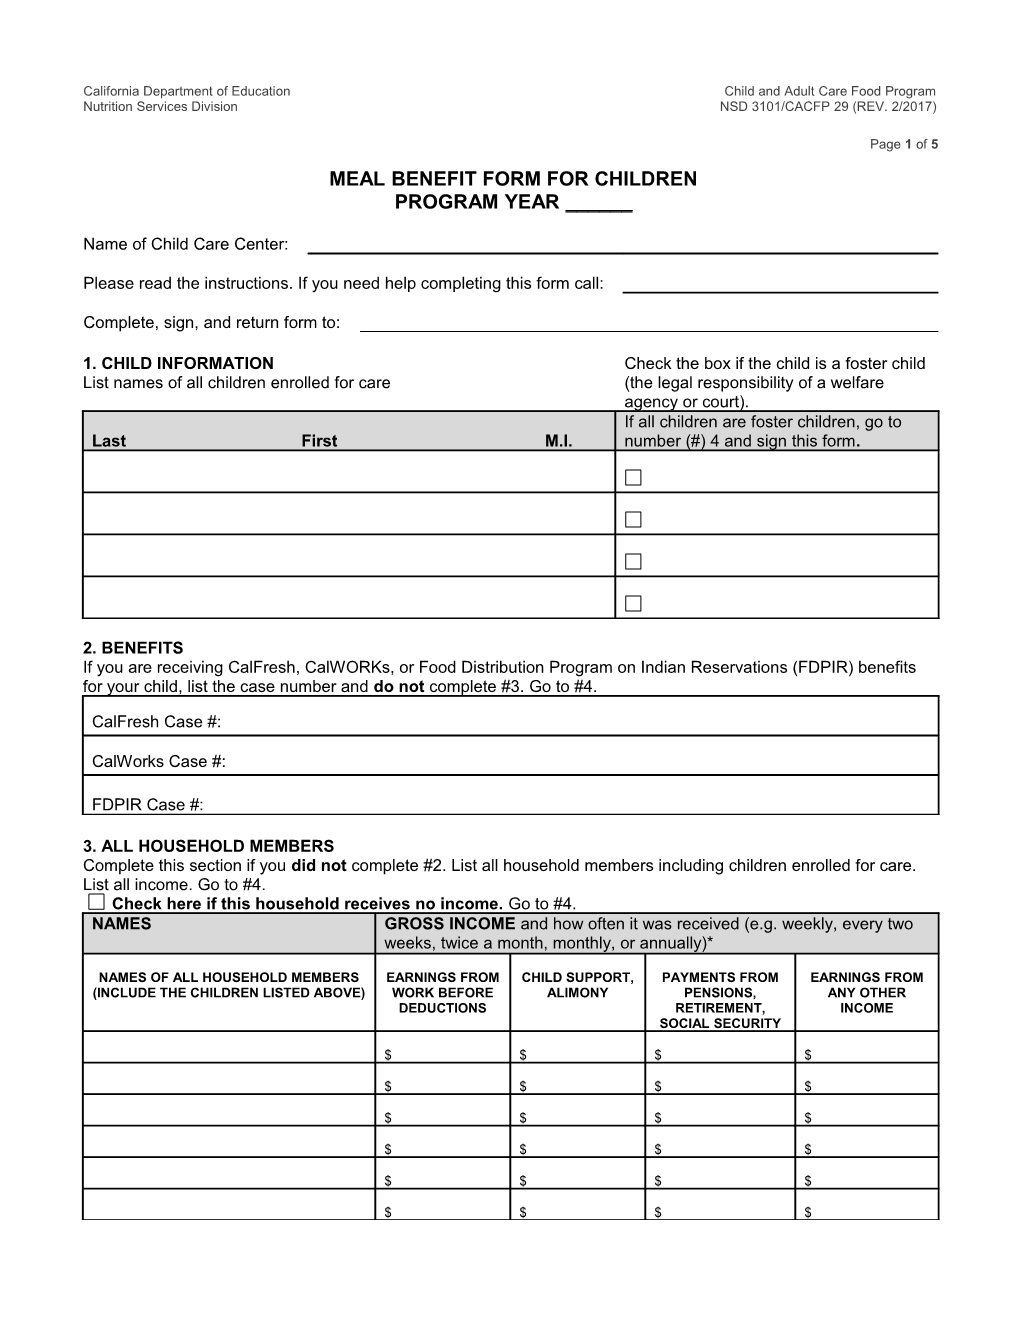 Child Care Center Meal Benefit Form - Child and Adult Care Food Program (CA Dept of Education)